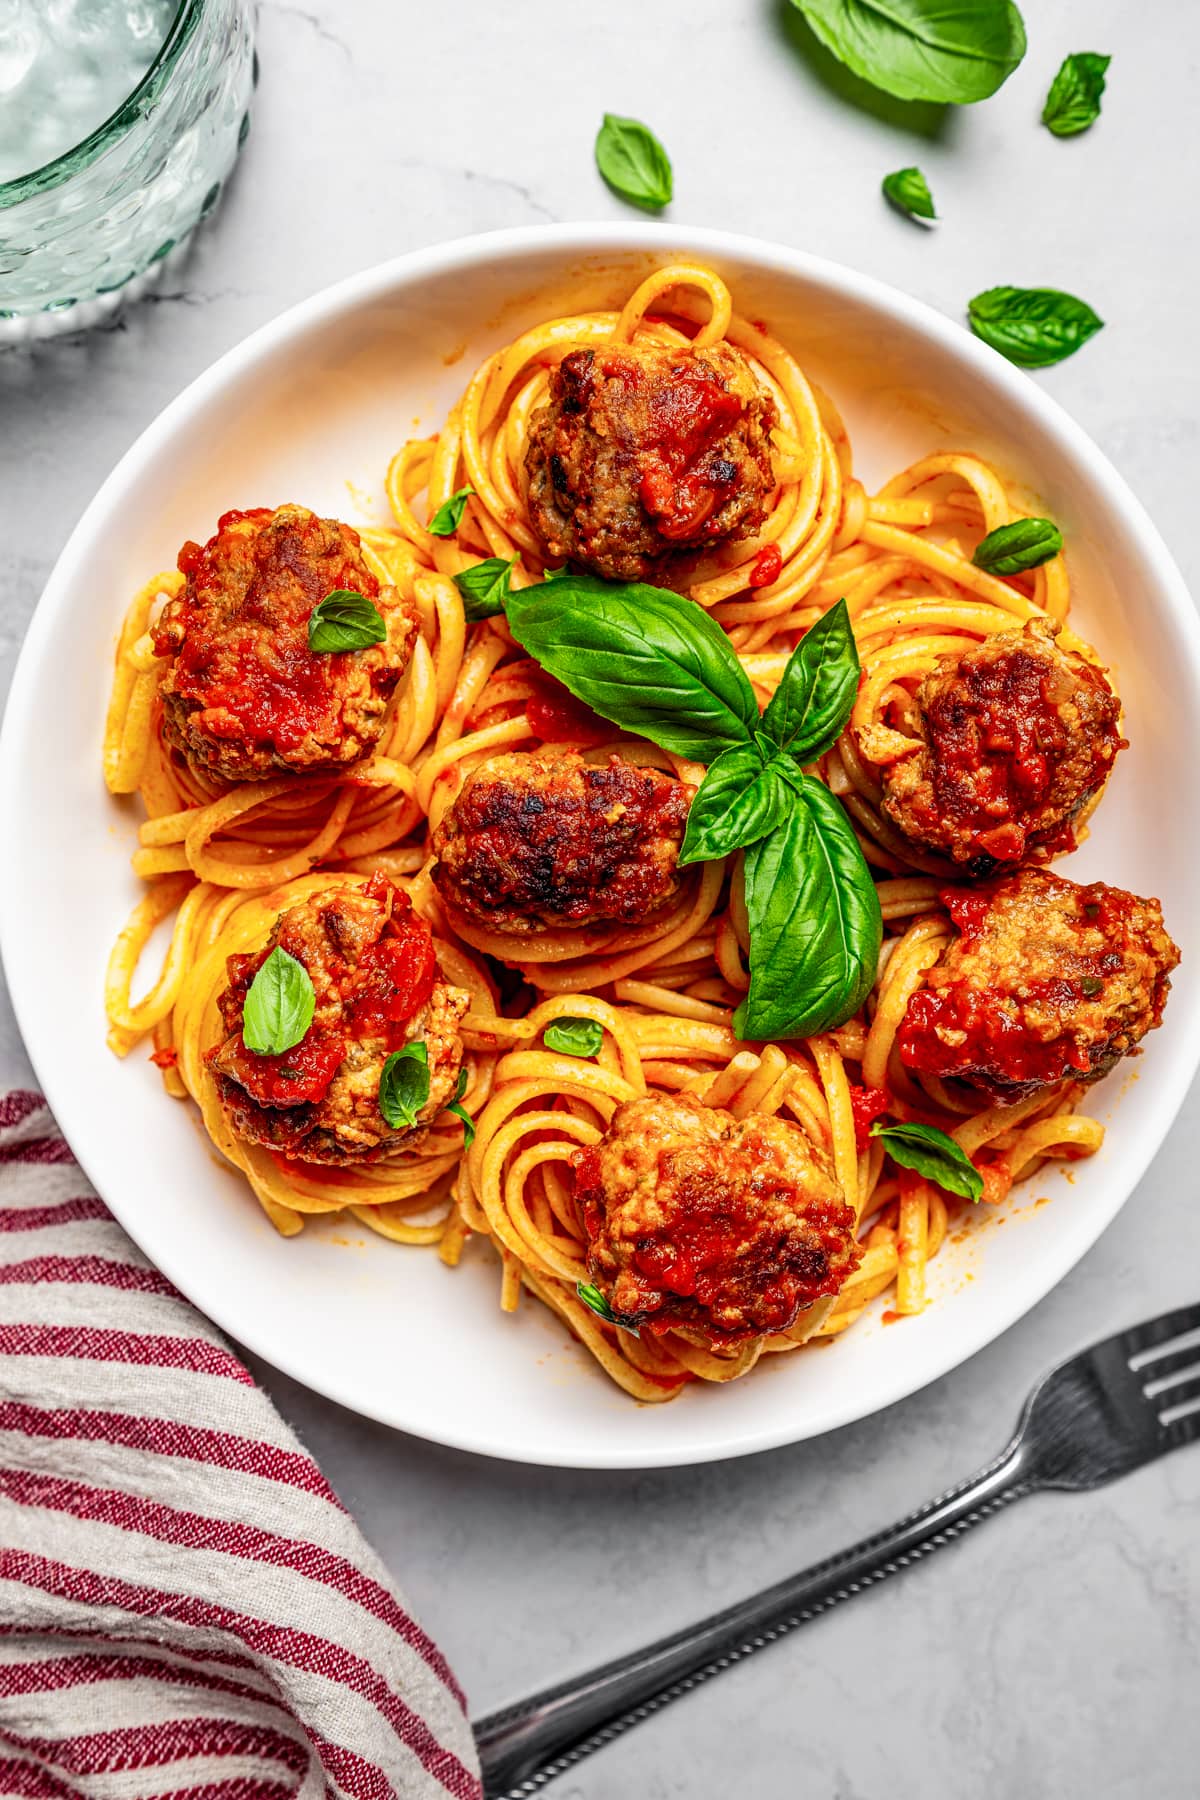 Overhead view of a bowl of spaghetti and pork meatballs garnished with fresh basil leaves.